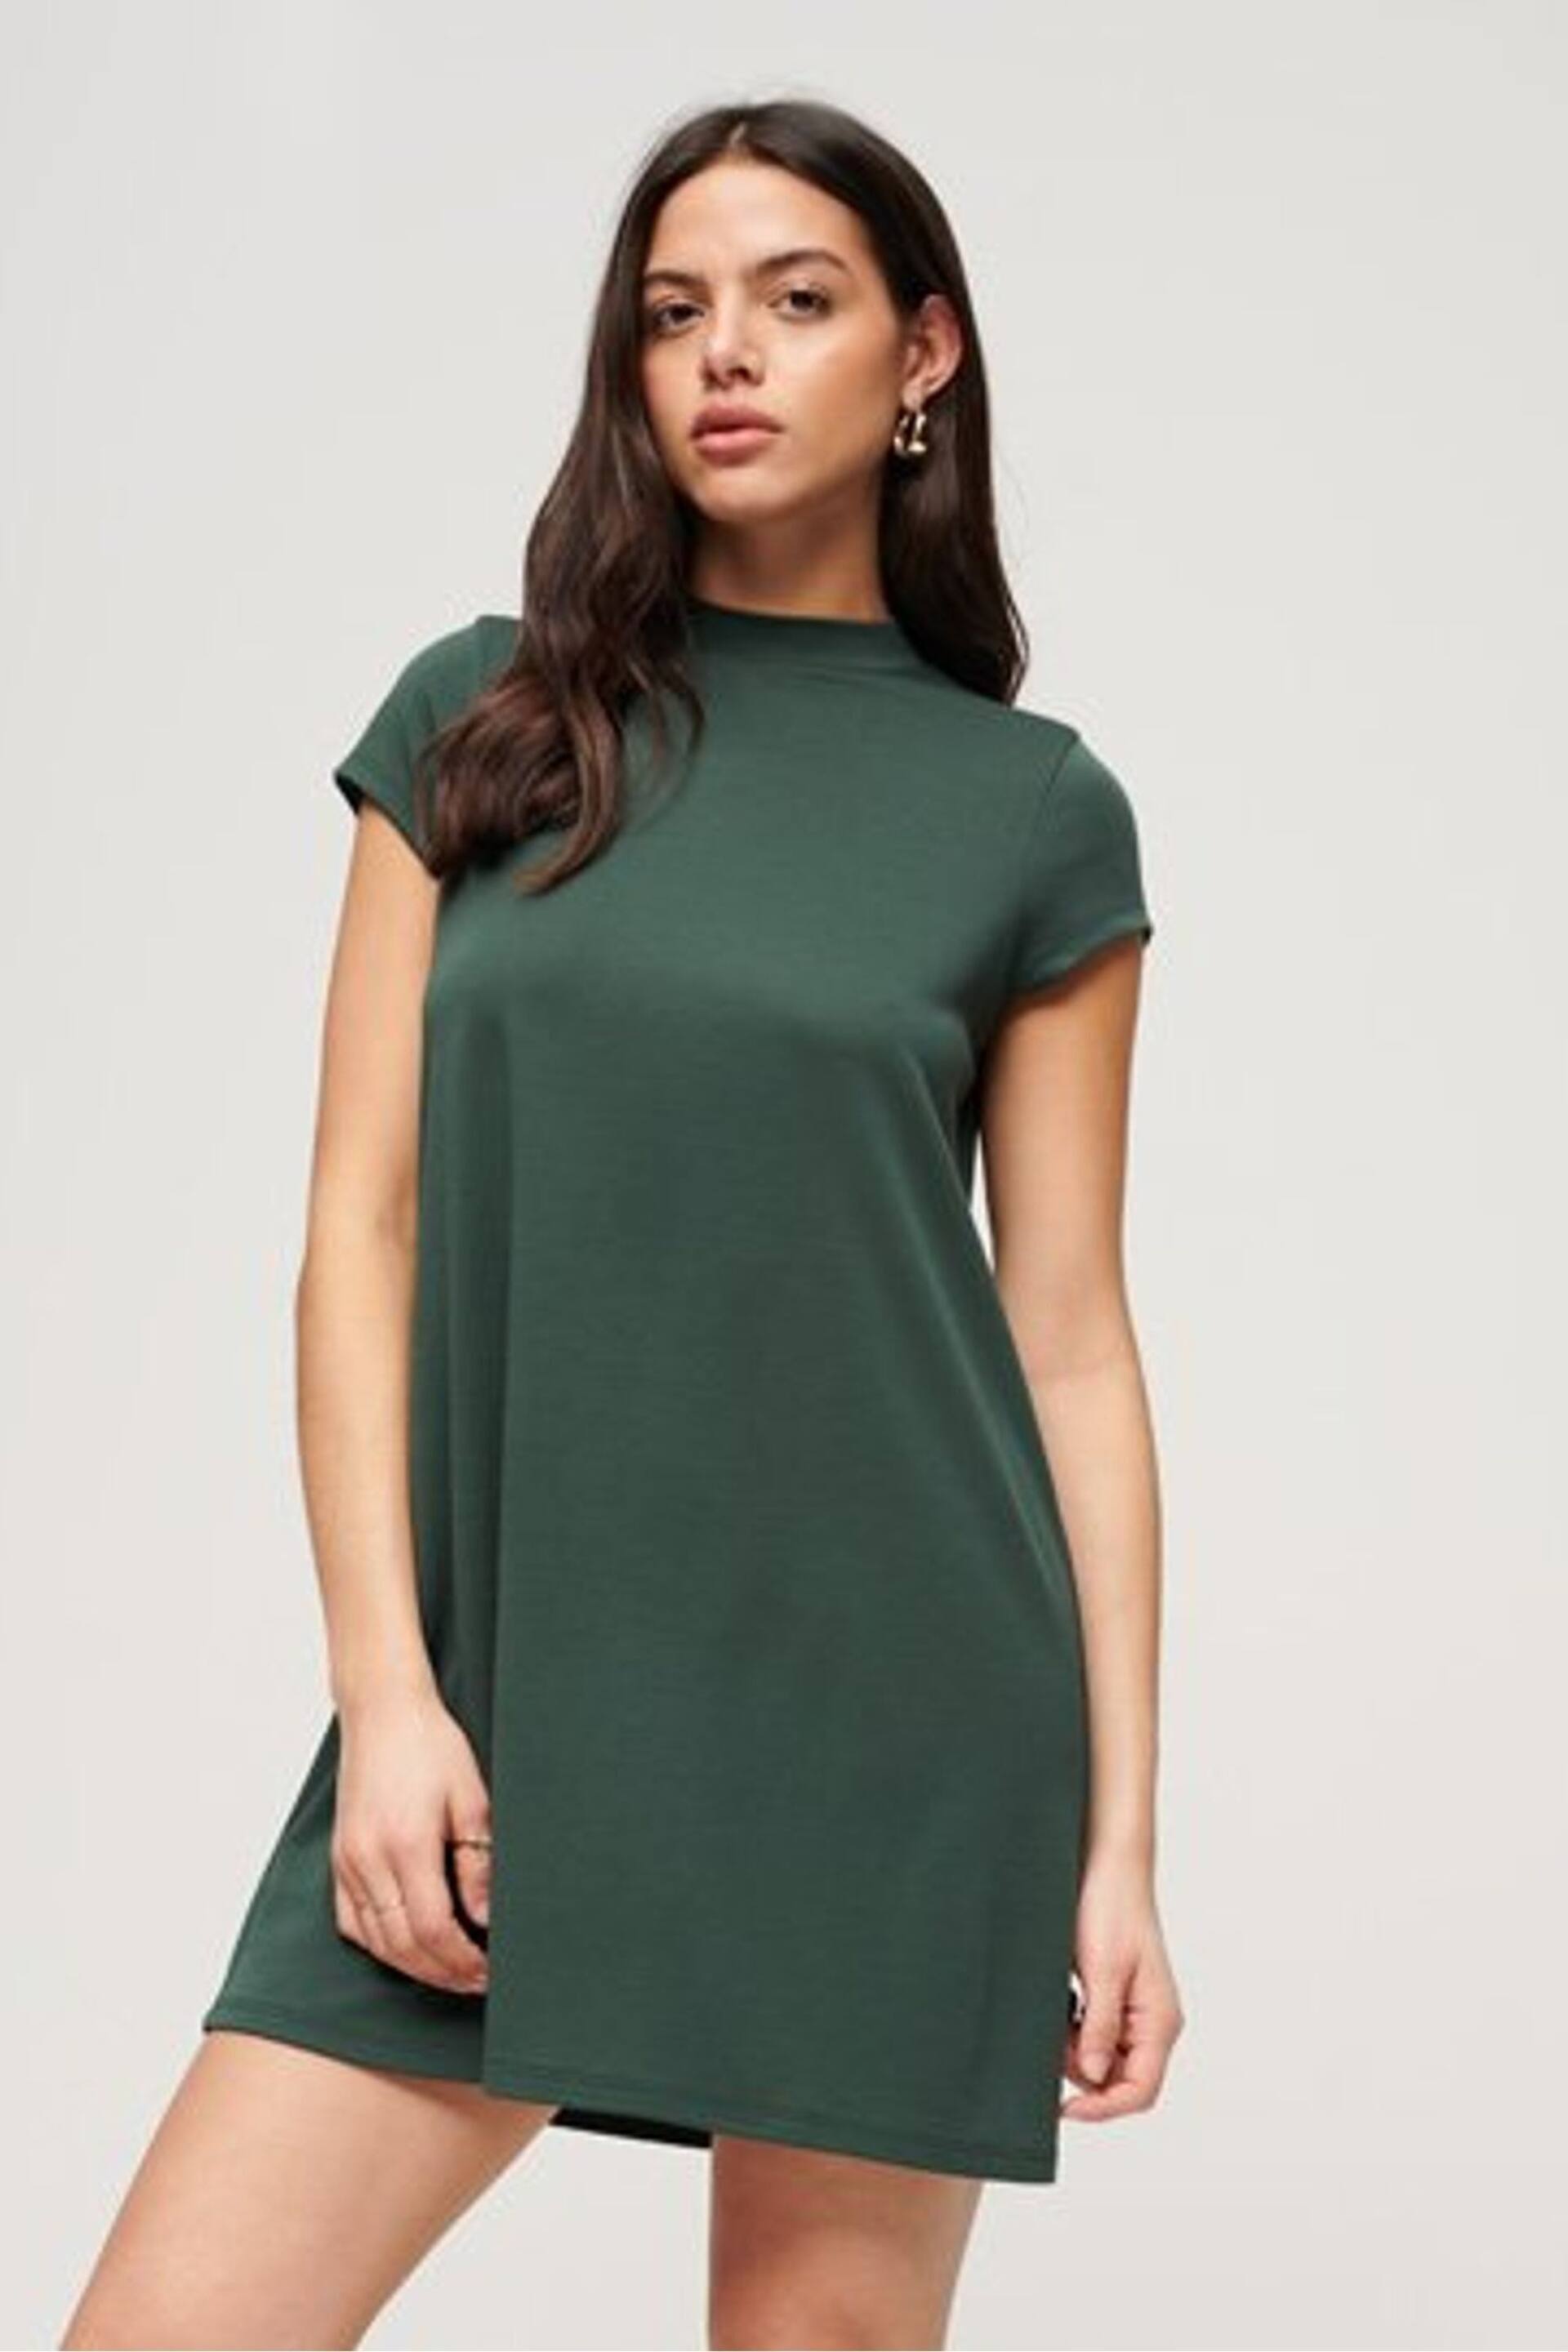 Superdry Green Short Sleeve A-line Mini Dress - Image 3 of 5